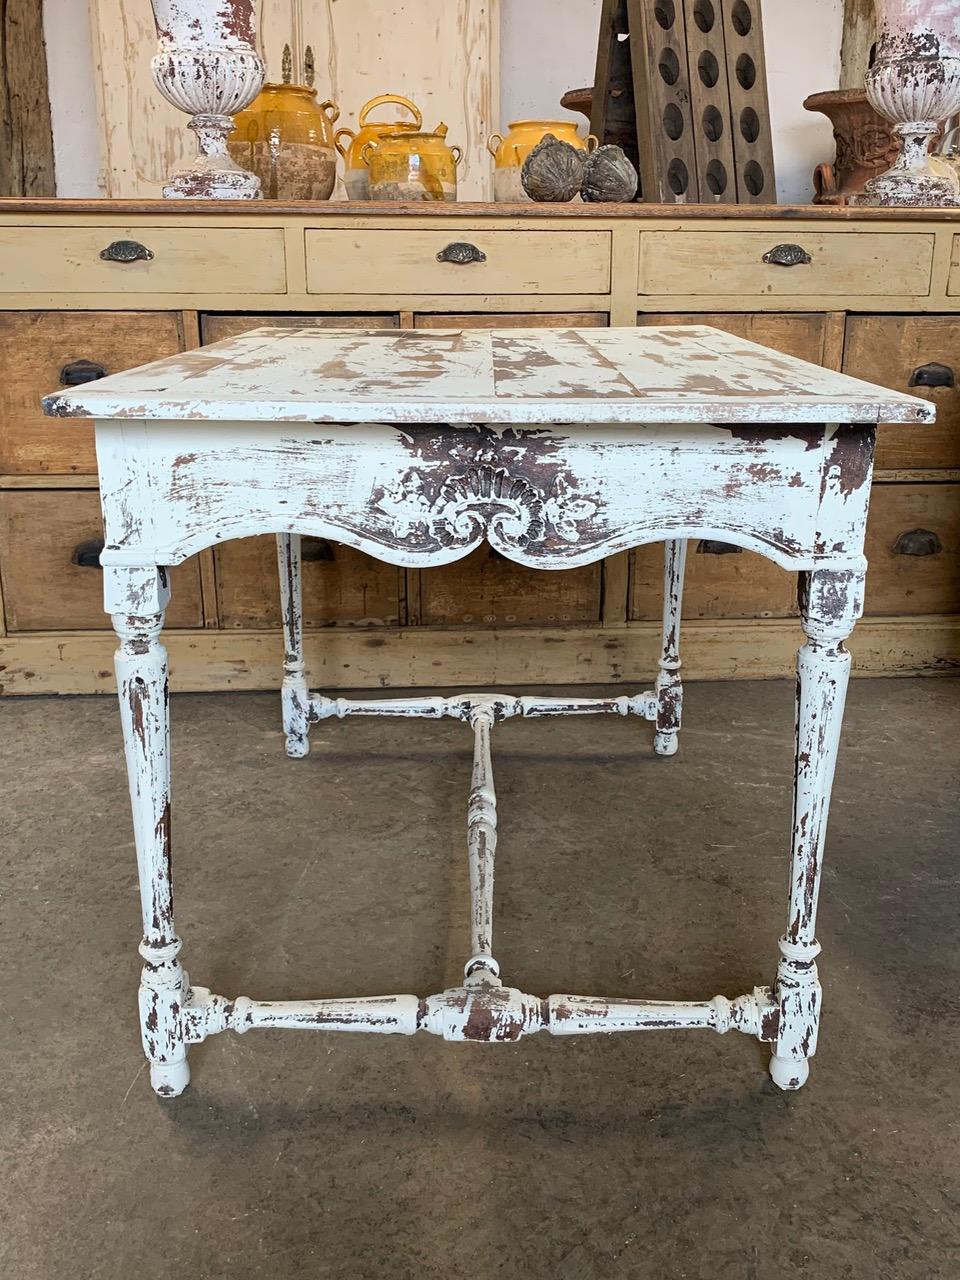 A beautiful decorative French table from the early 20th century. With lovely decorative wood carvings and original worn paint. Circa 1900 in date.